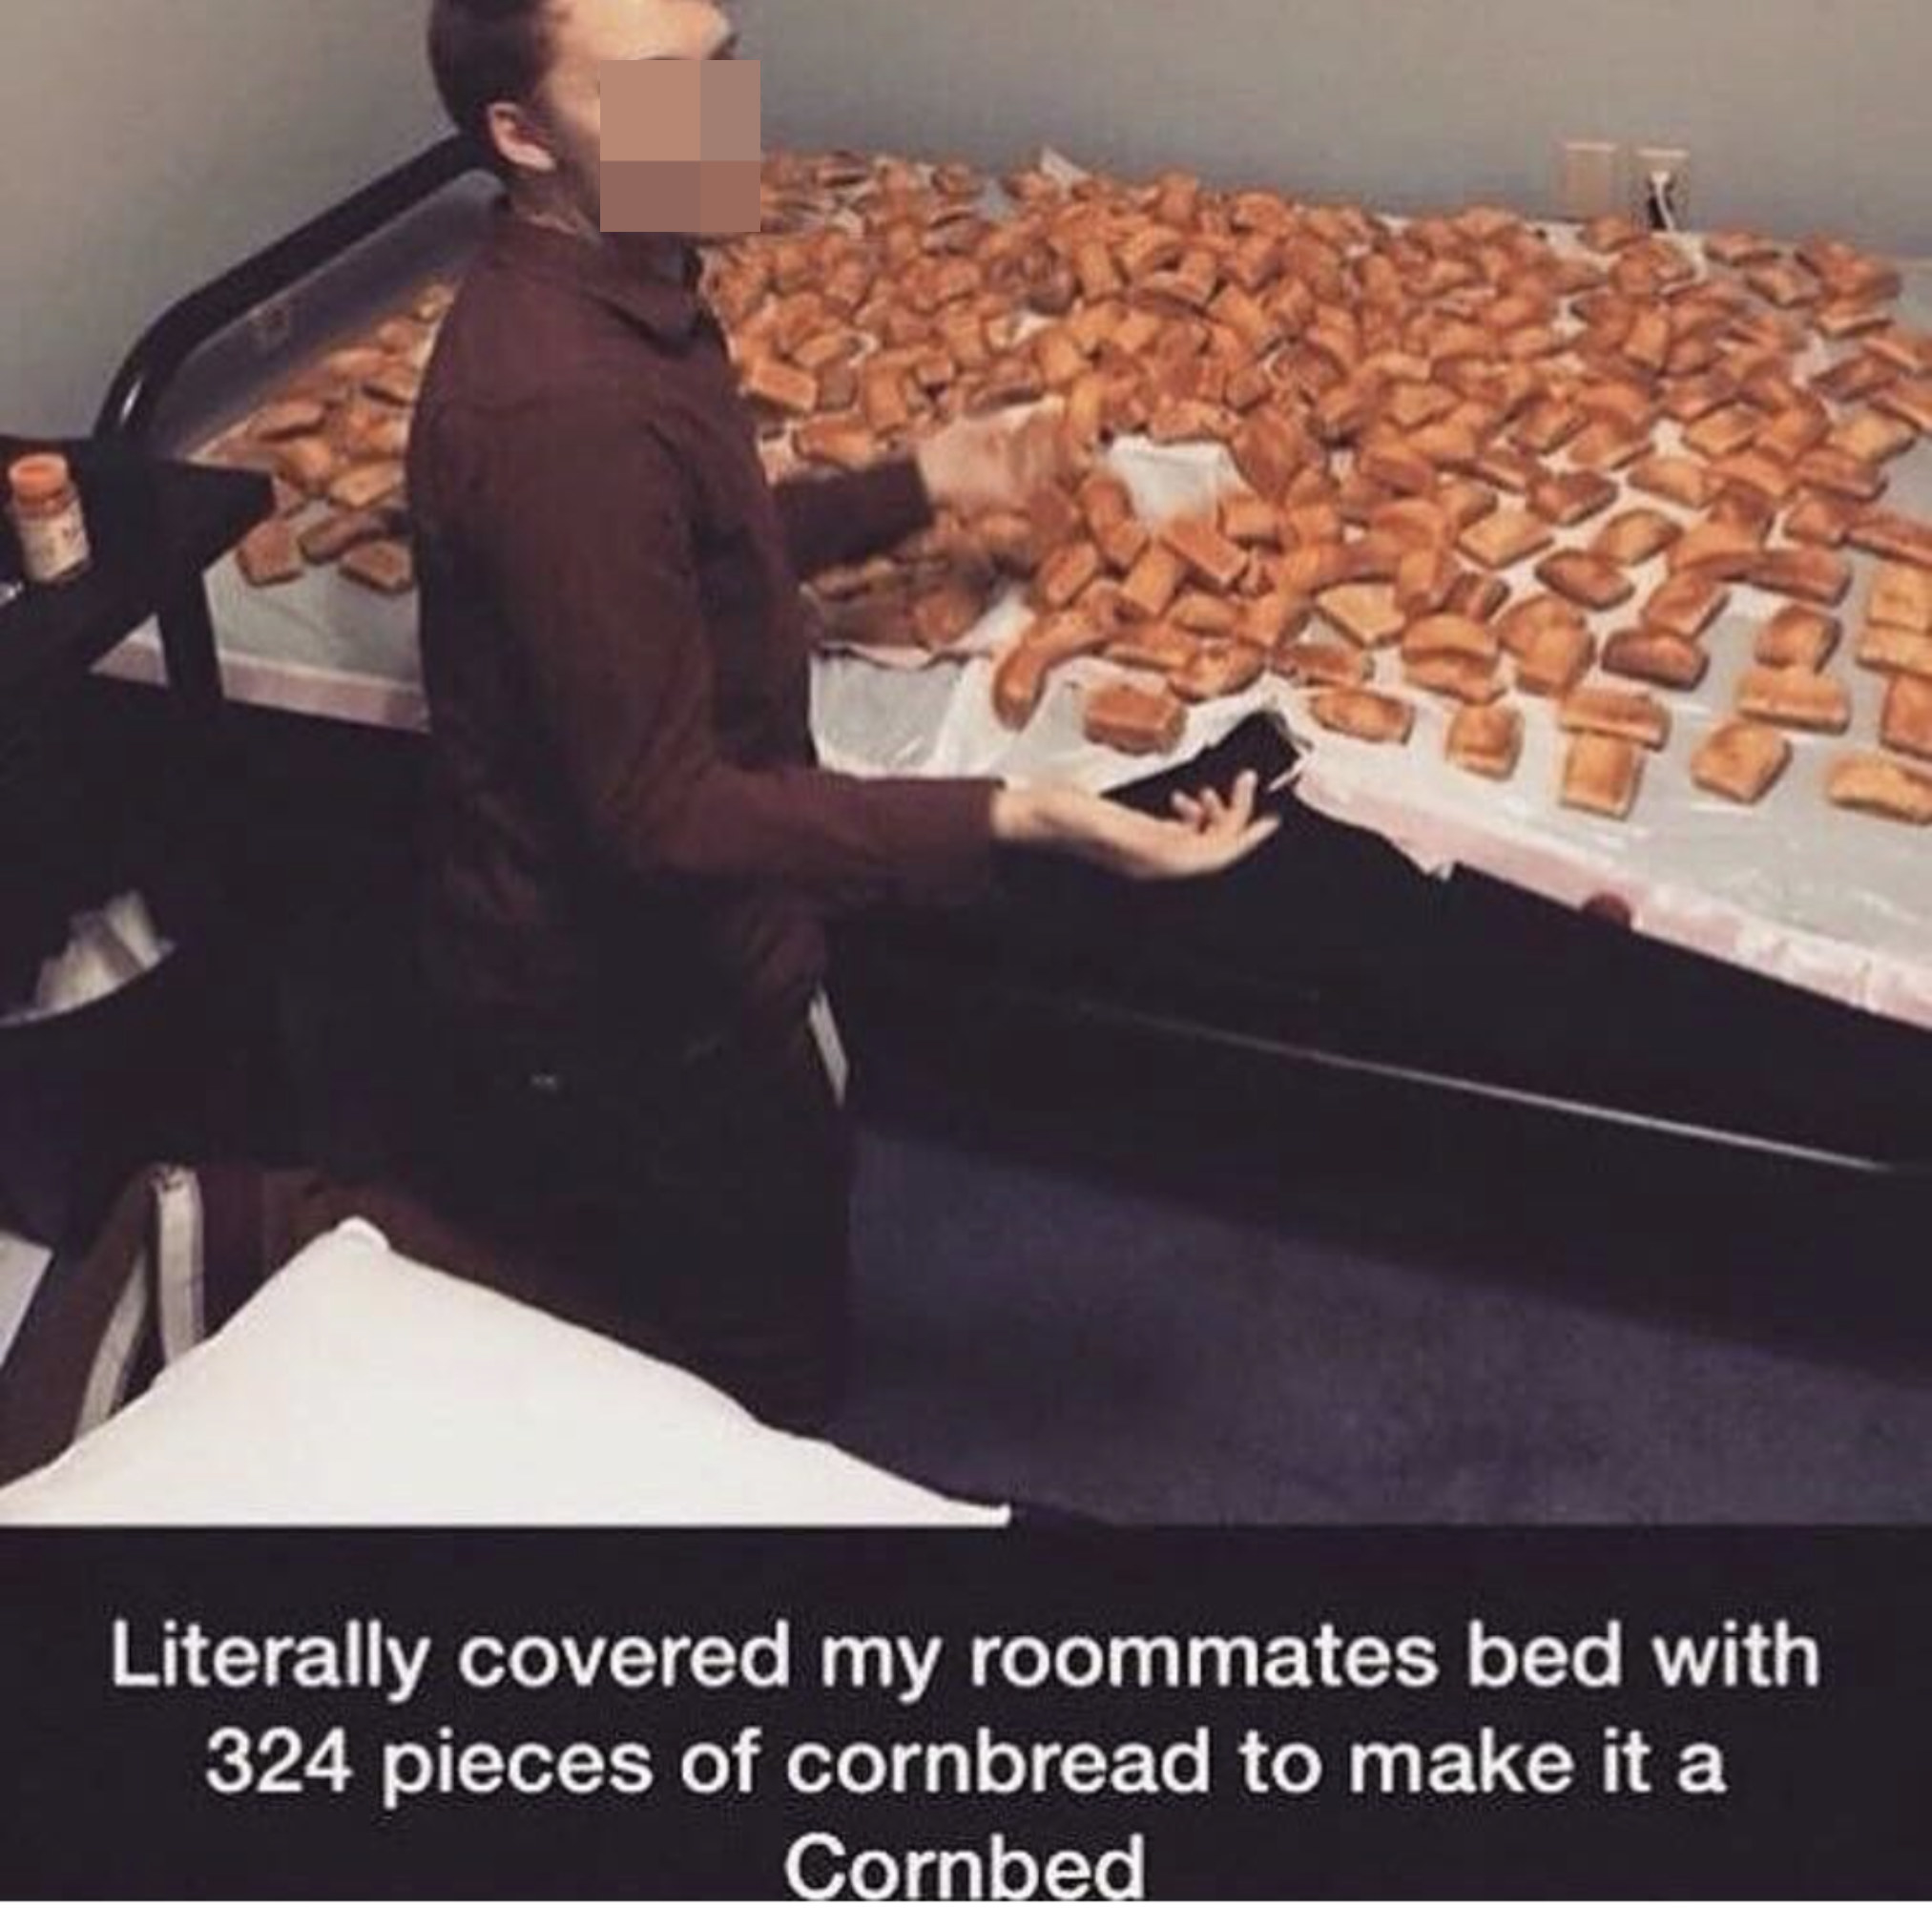 slices of cornbread covering up a roommates bed